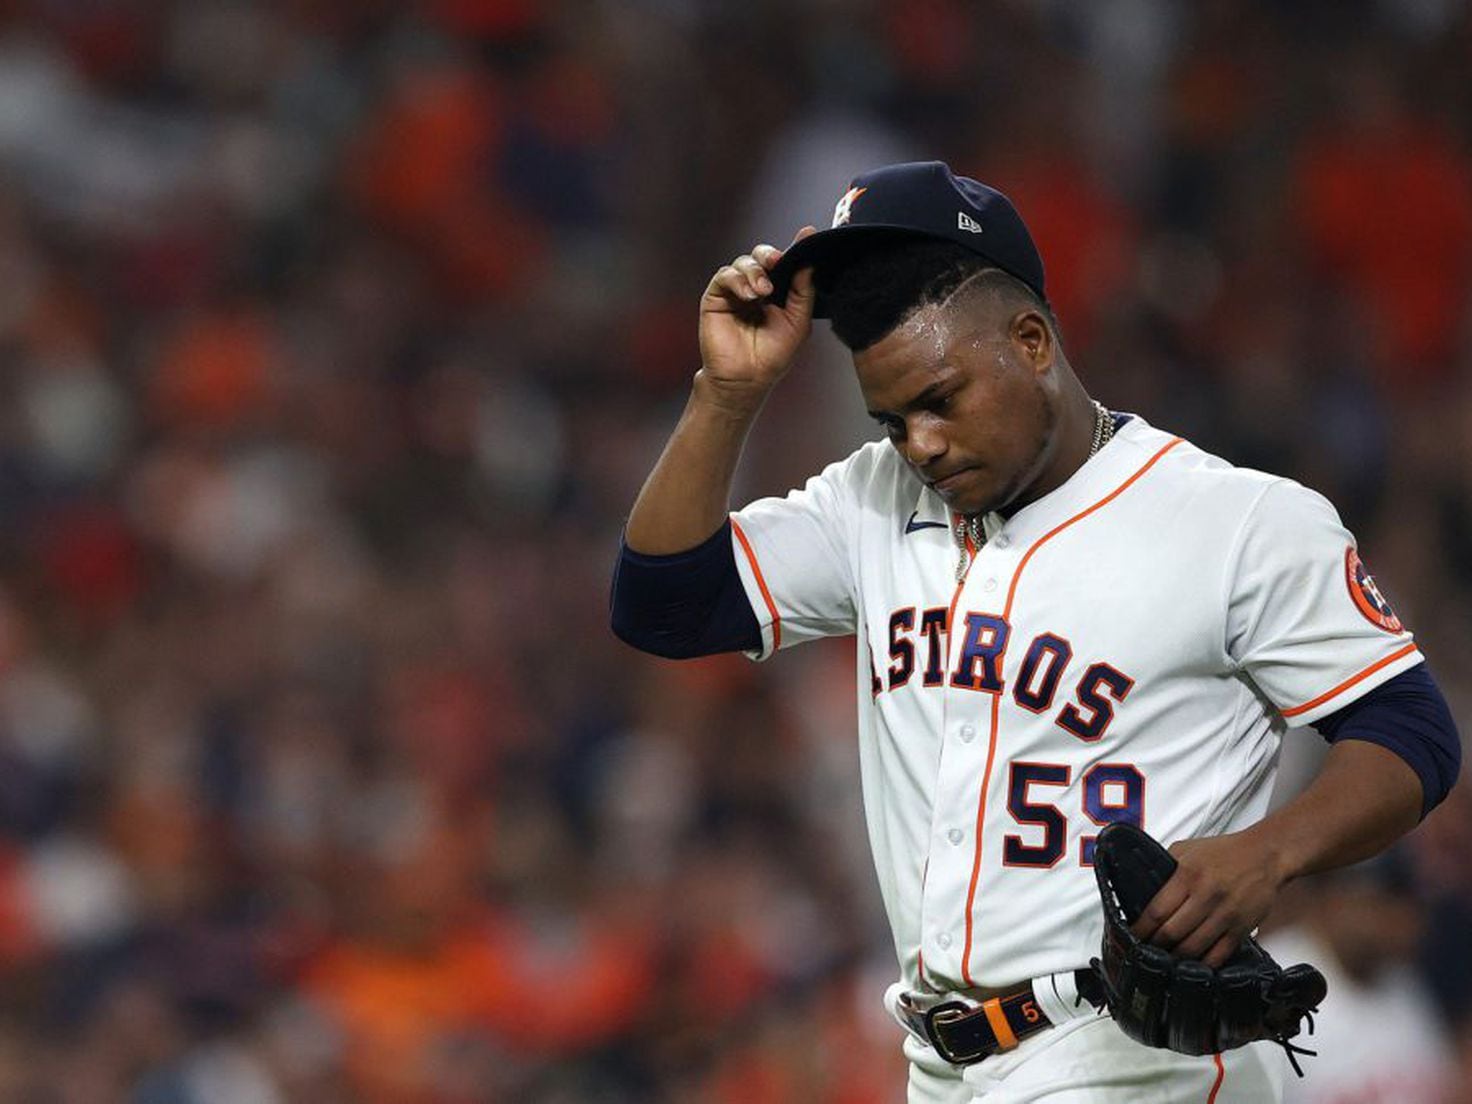 World Series: Houston Astros vs. TBD - Home Game 1 (Date: TBD - If